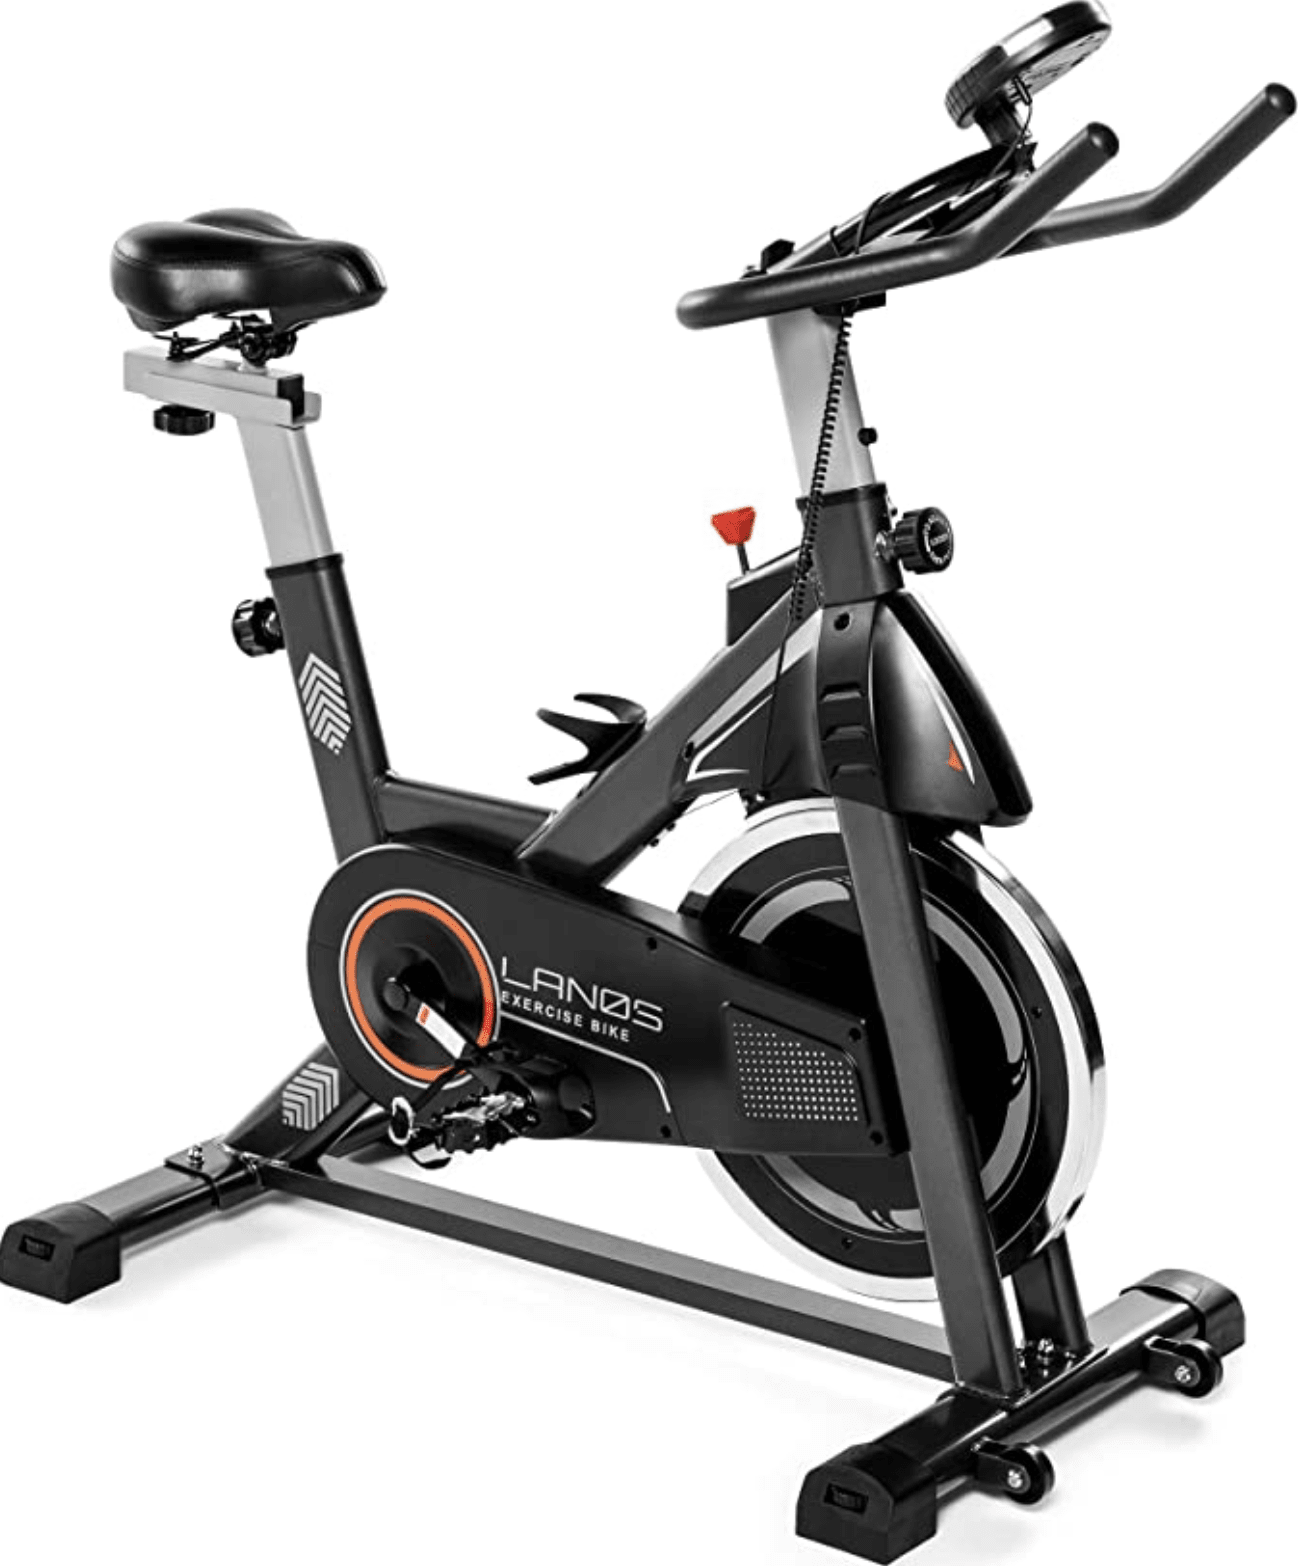 Yuege Indoor Cycling Bike New Model Spin Bike Exercise Bike,Exercise Bike Indoor Cycling Bike Peloton Bicycle for Home Gym Workout Fitness Equipment Stationary Trainer Bikes Upright Bike 